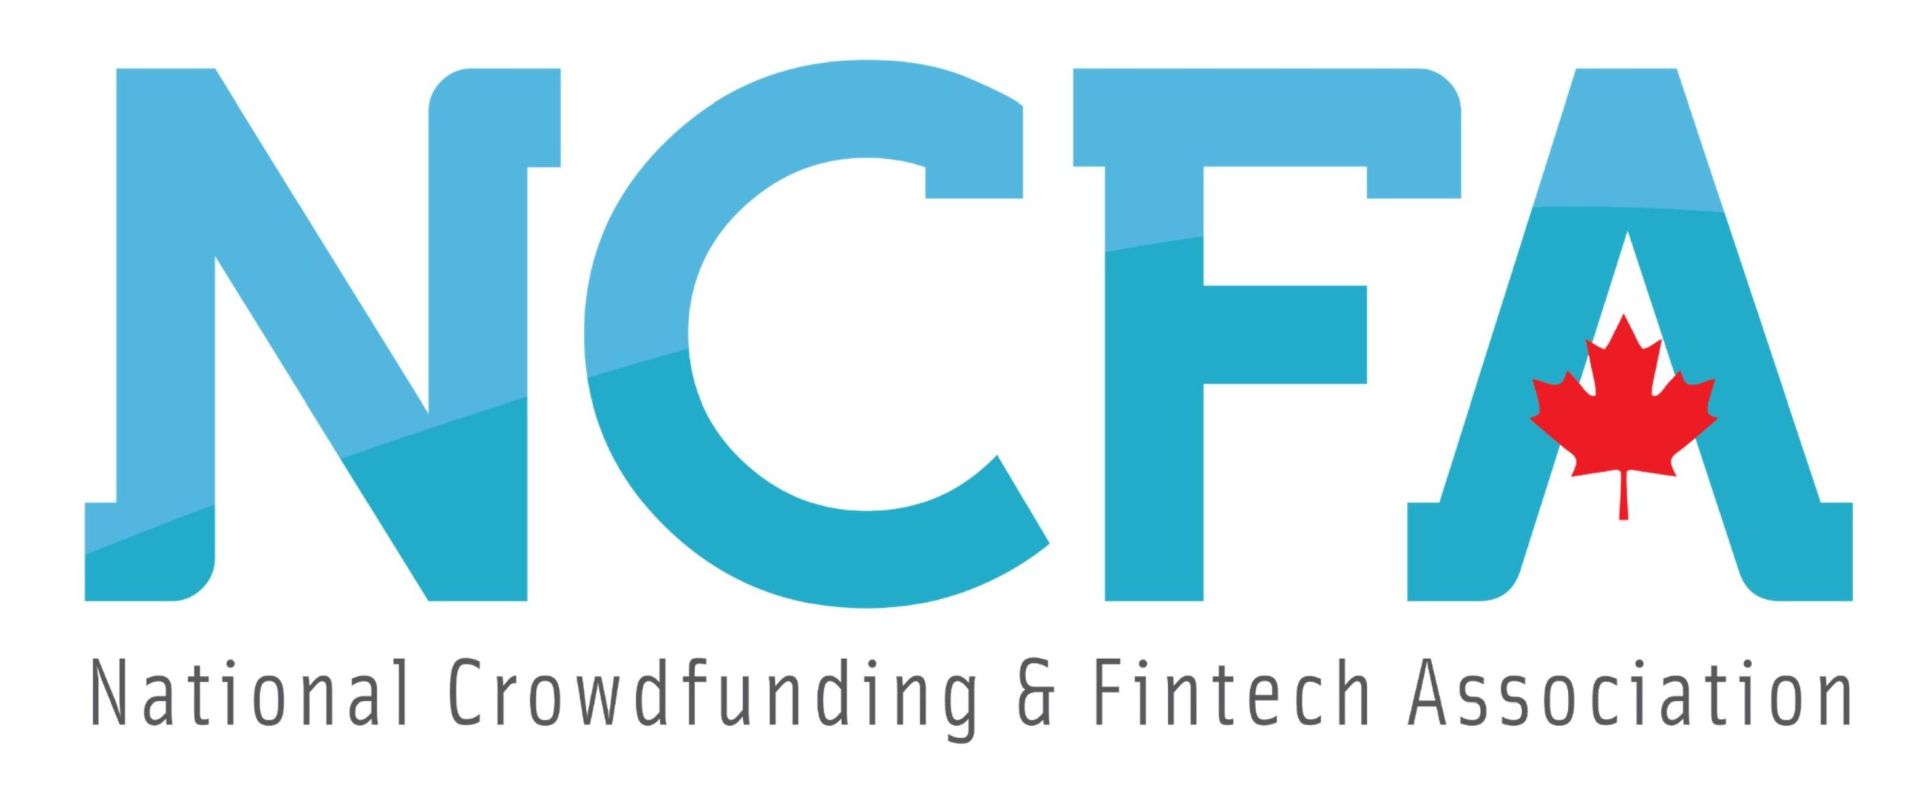 NCFA logo - May 31 NCFA Event Presented by DIGTL: 7th Annual Fintech & Funding Summer Kickoff Networking ON SALE NOW!